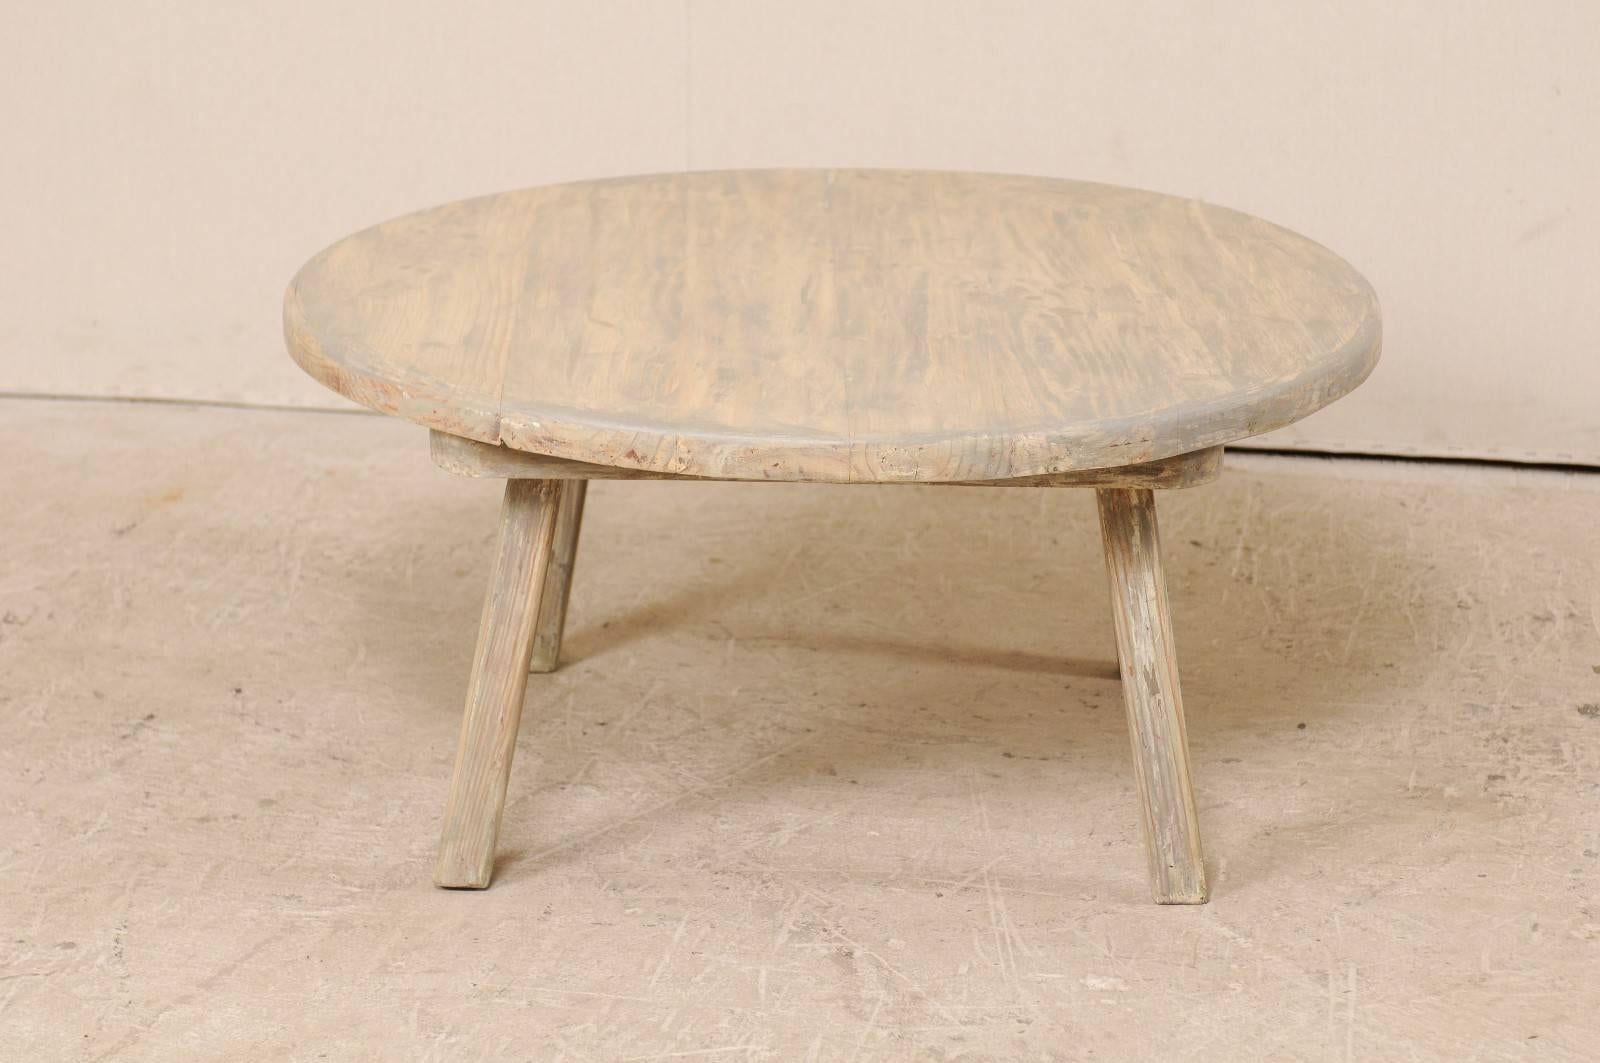 American Vintage Rustic Painted Wood Coffee Table Washed in Muted Grey and Cream Colors